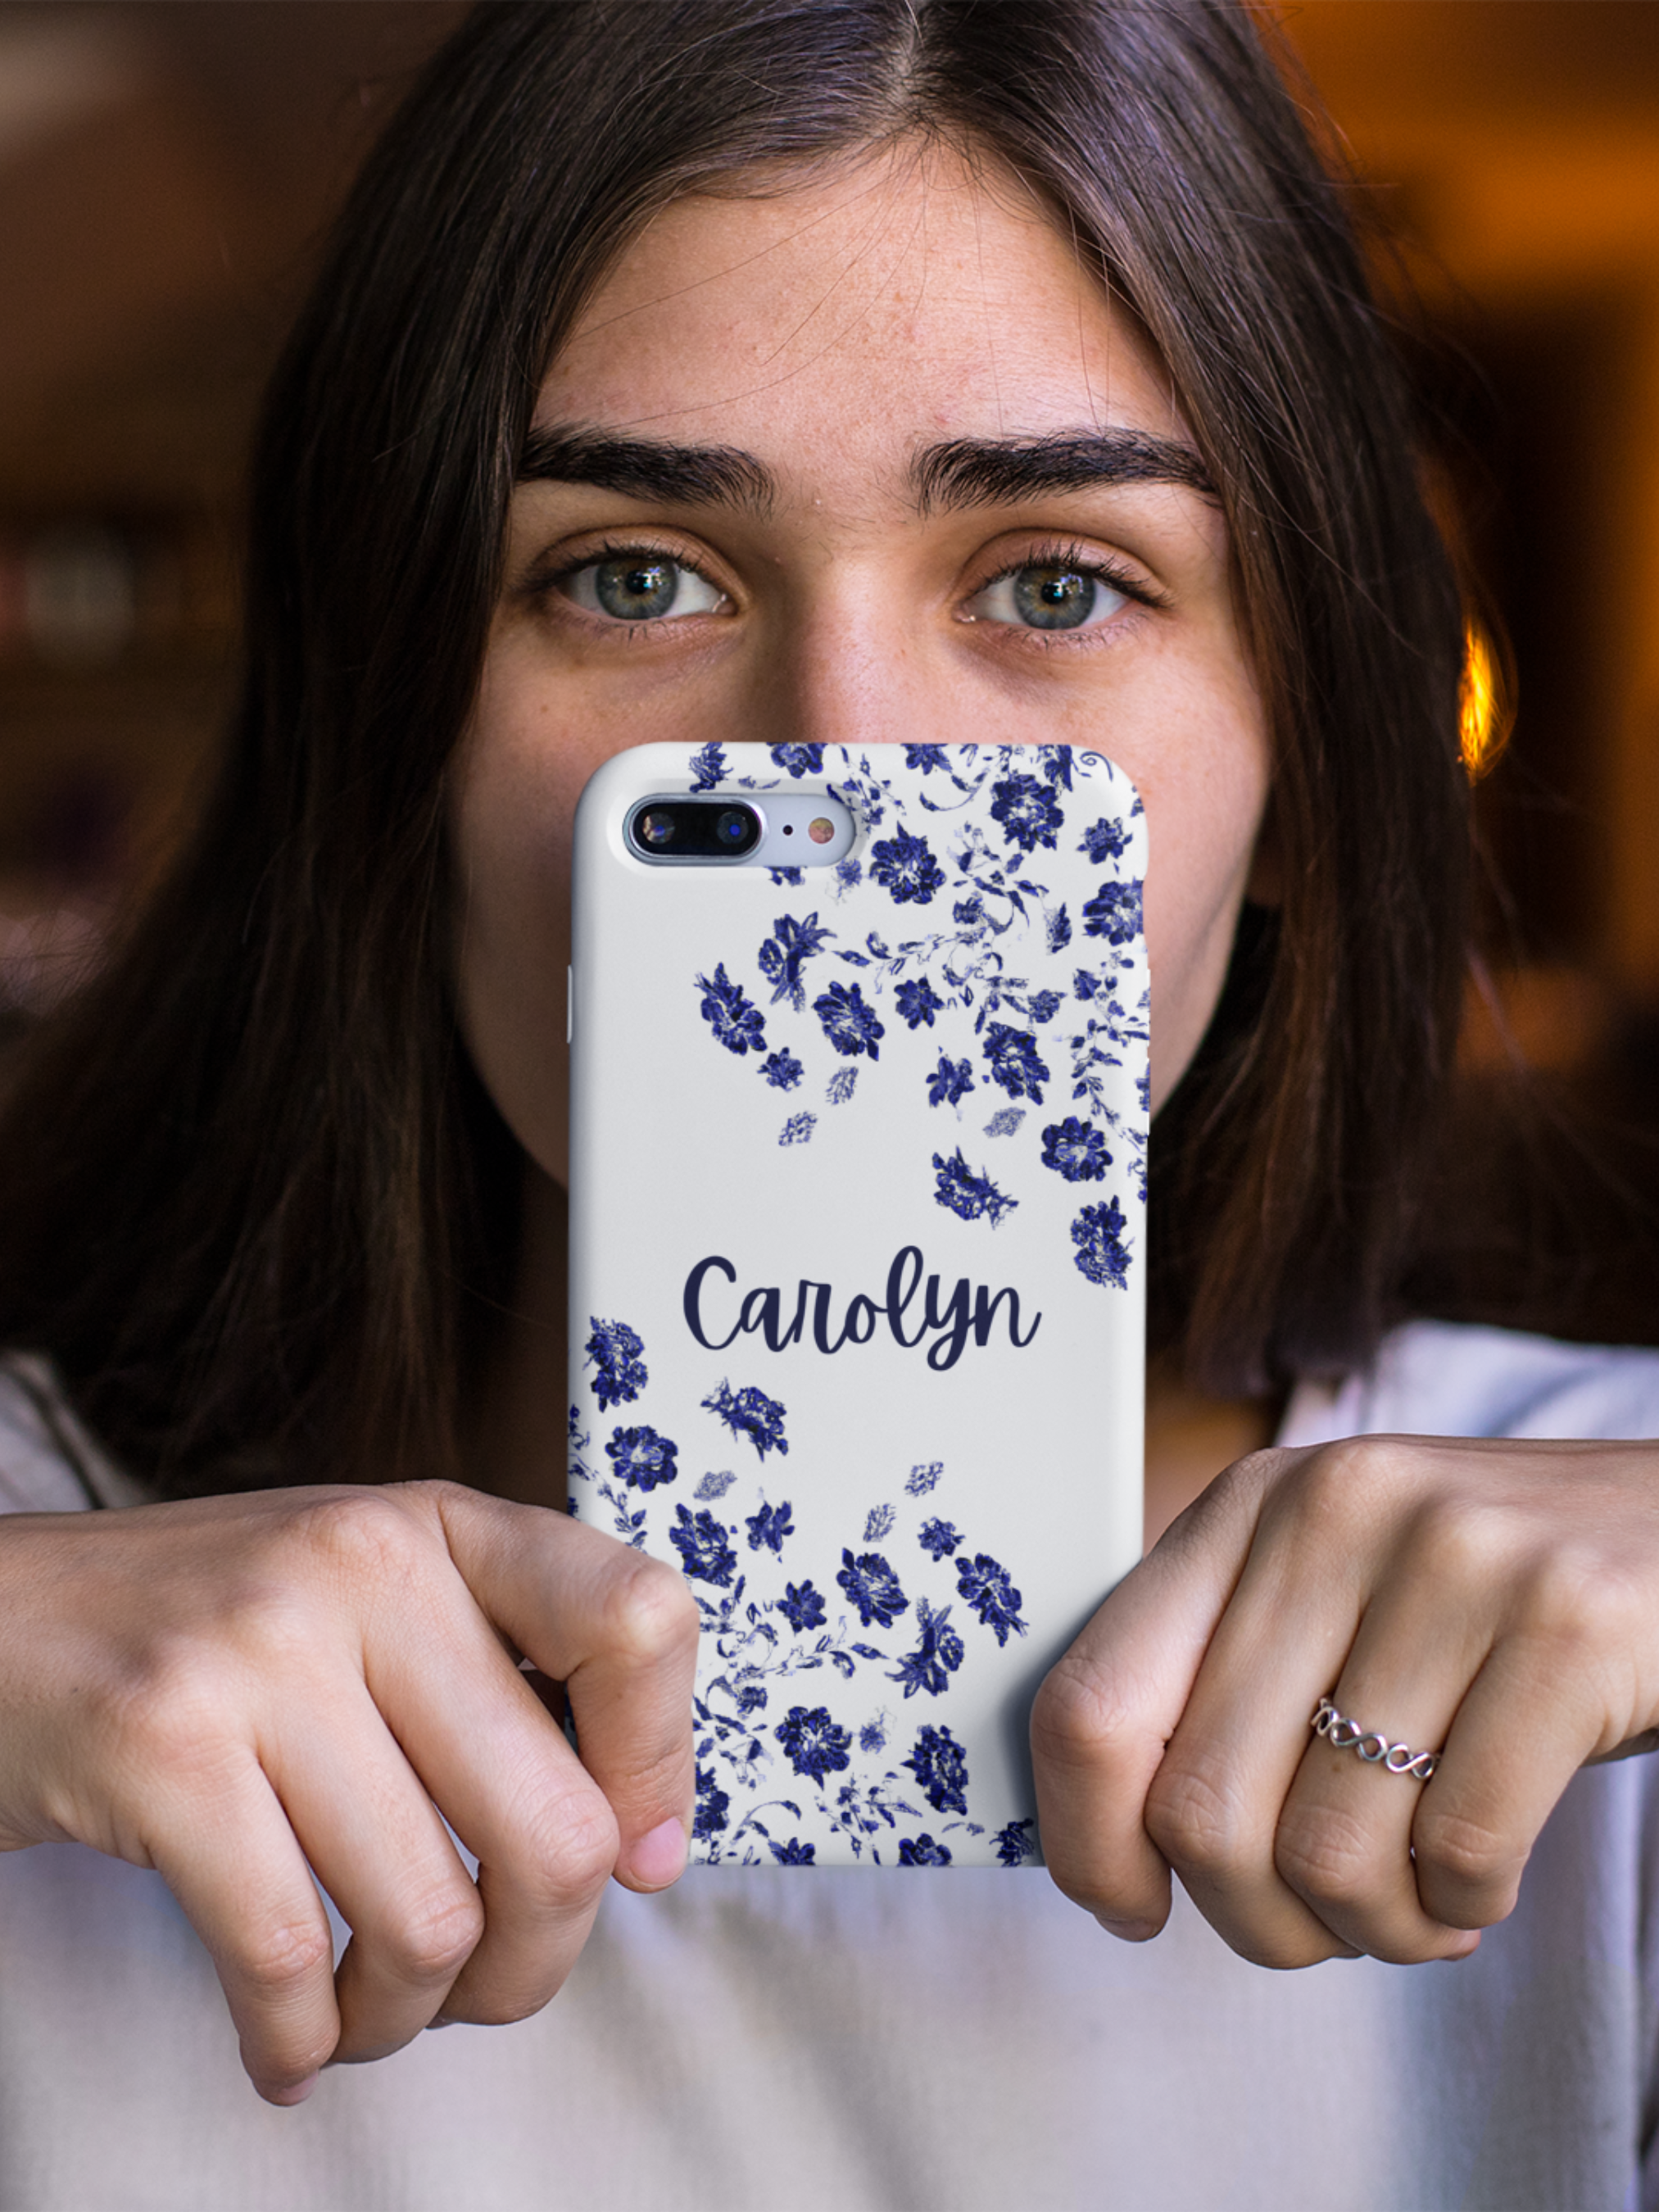 Phone Case: Blue Watercolour Floral Print iPhone Case with Personalization Name Customization - iPhone Case Accessories, Protective Case